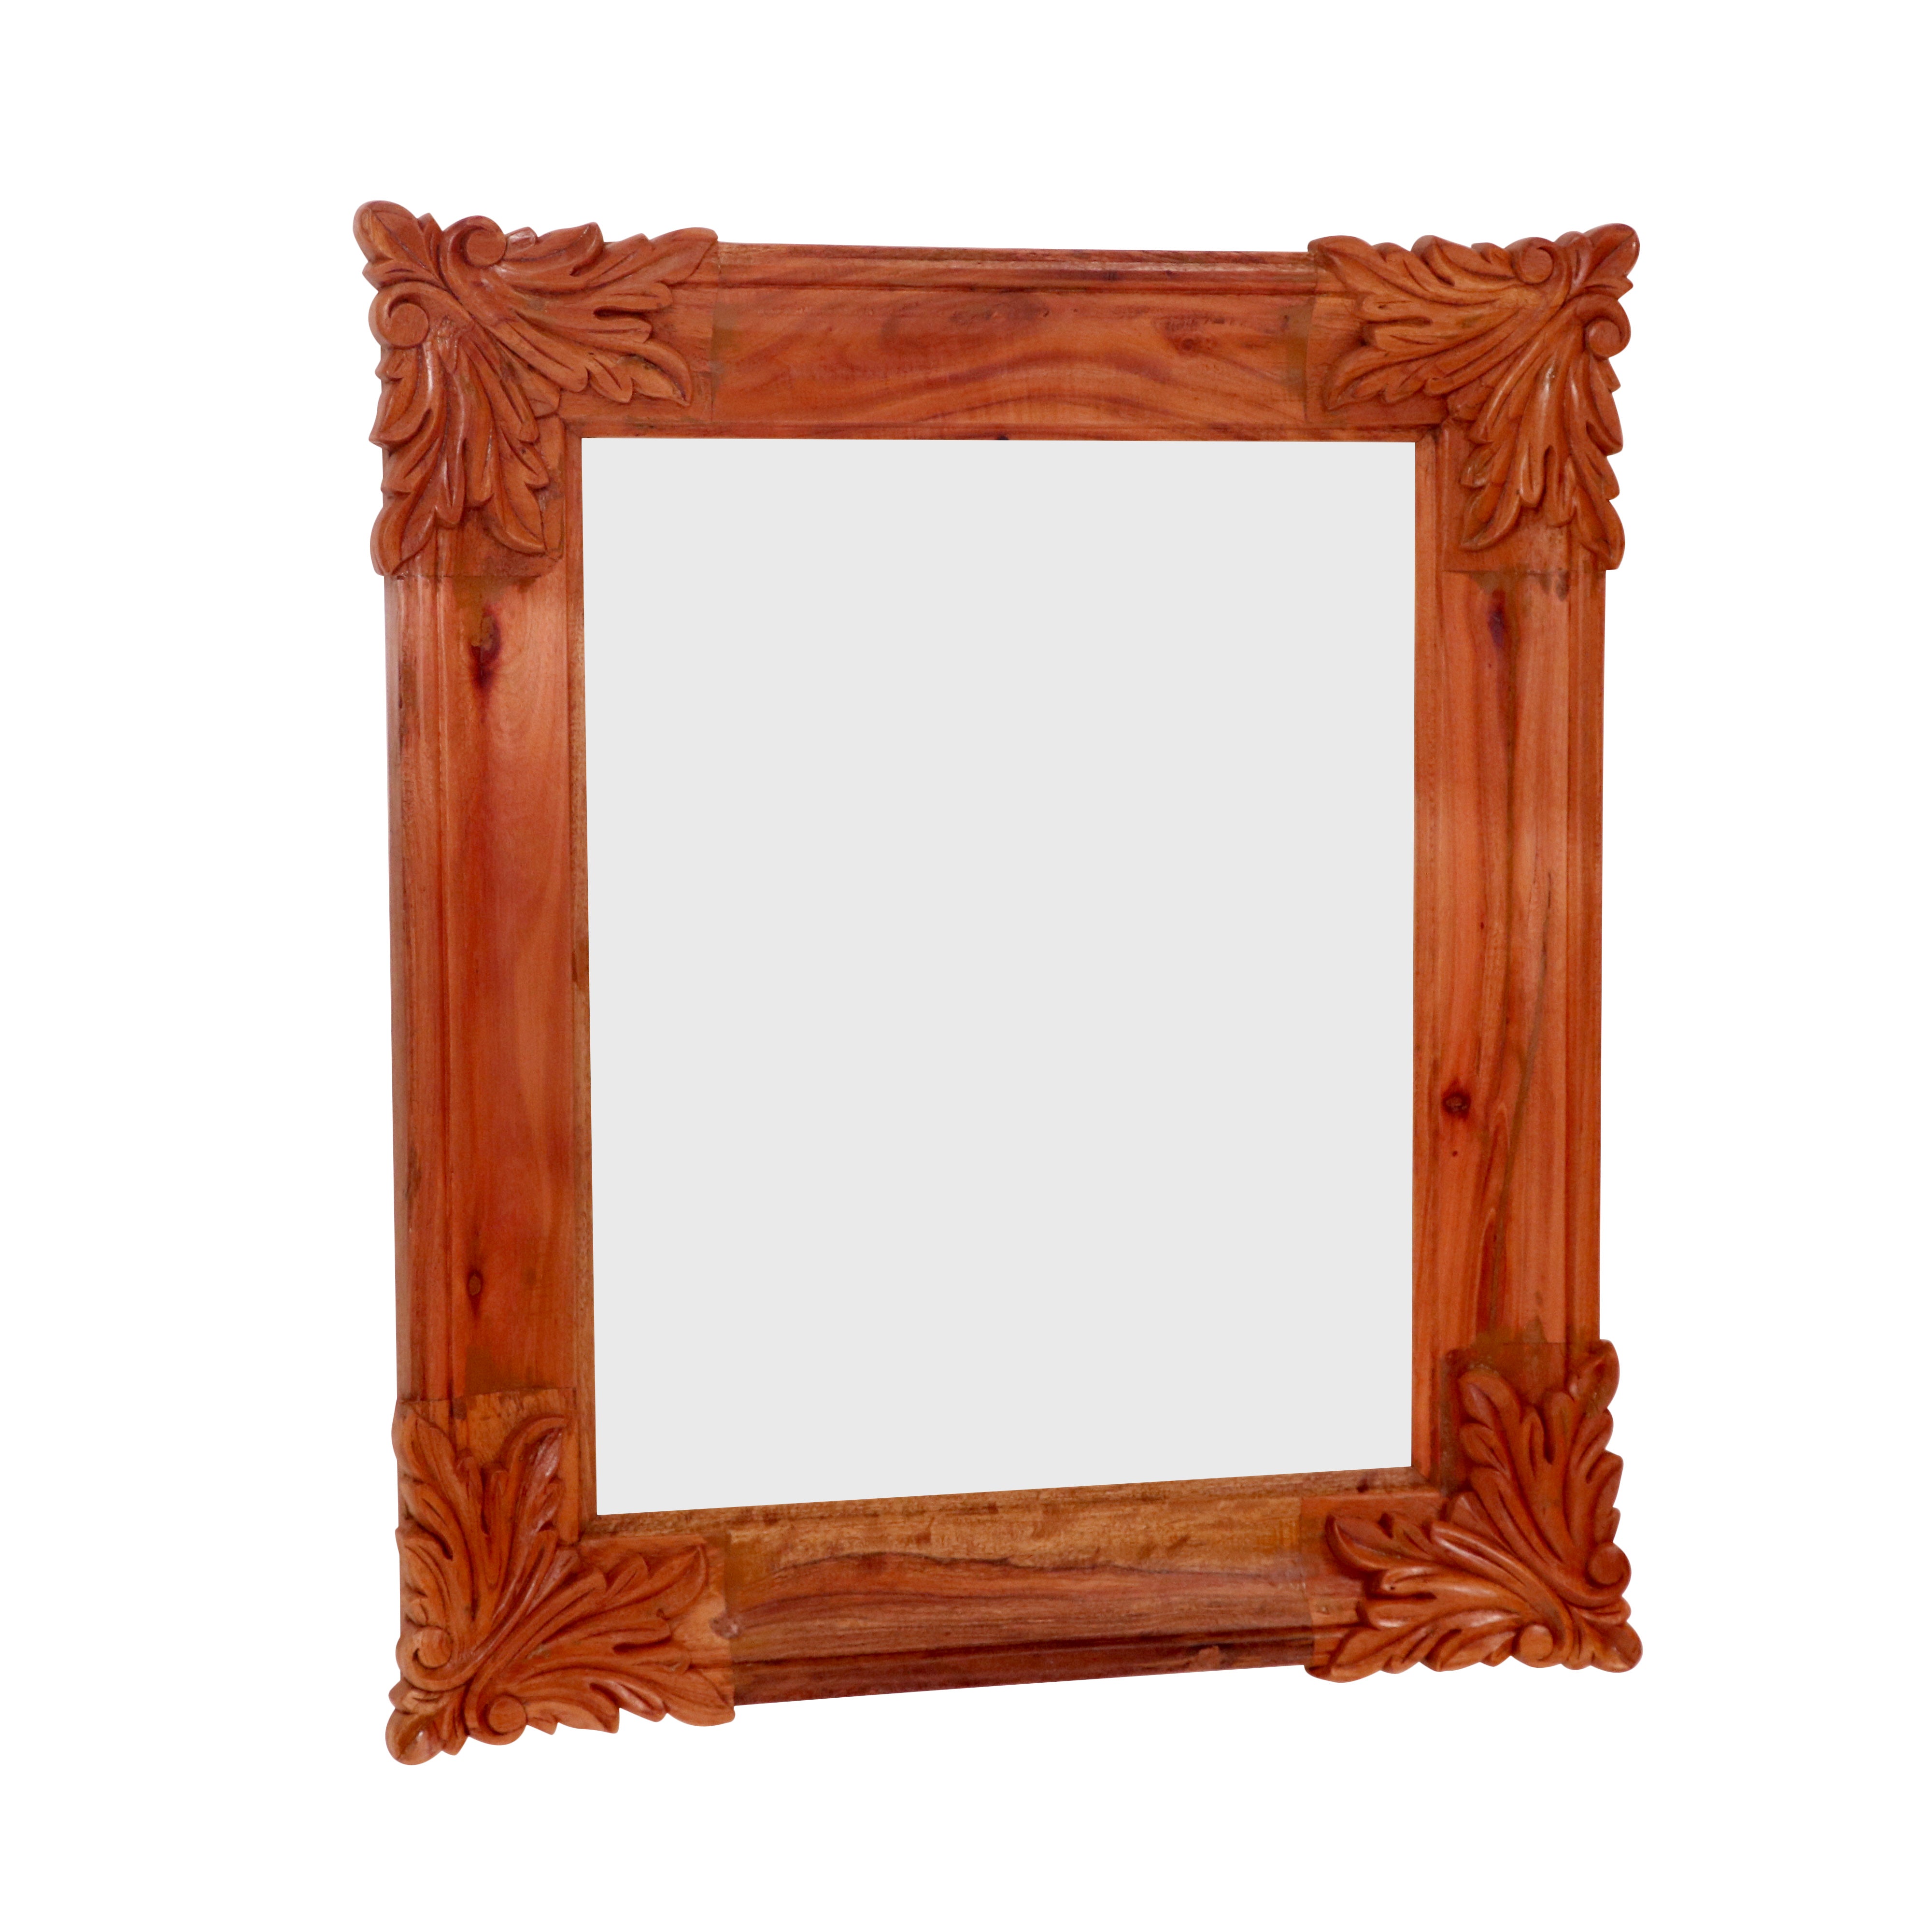 Ethnic Simple Handmade Corner Carved Wooden Wall Mirror Frame for Home Mirror